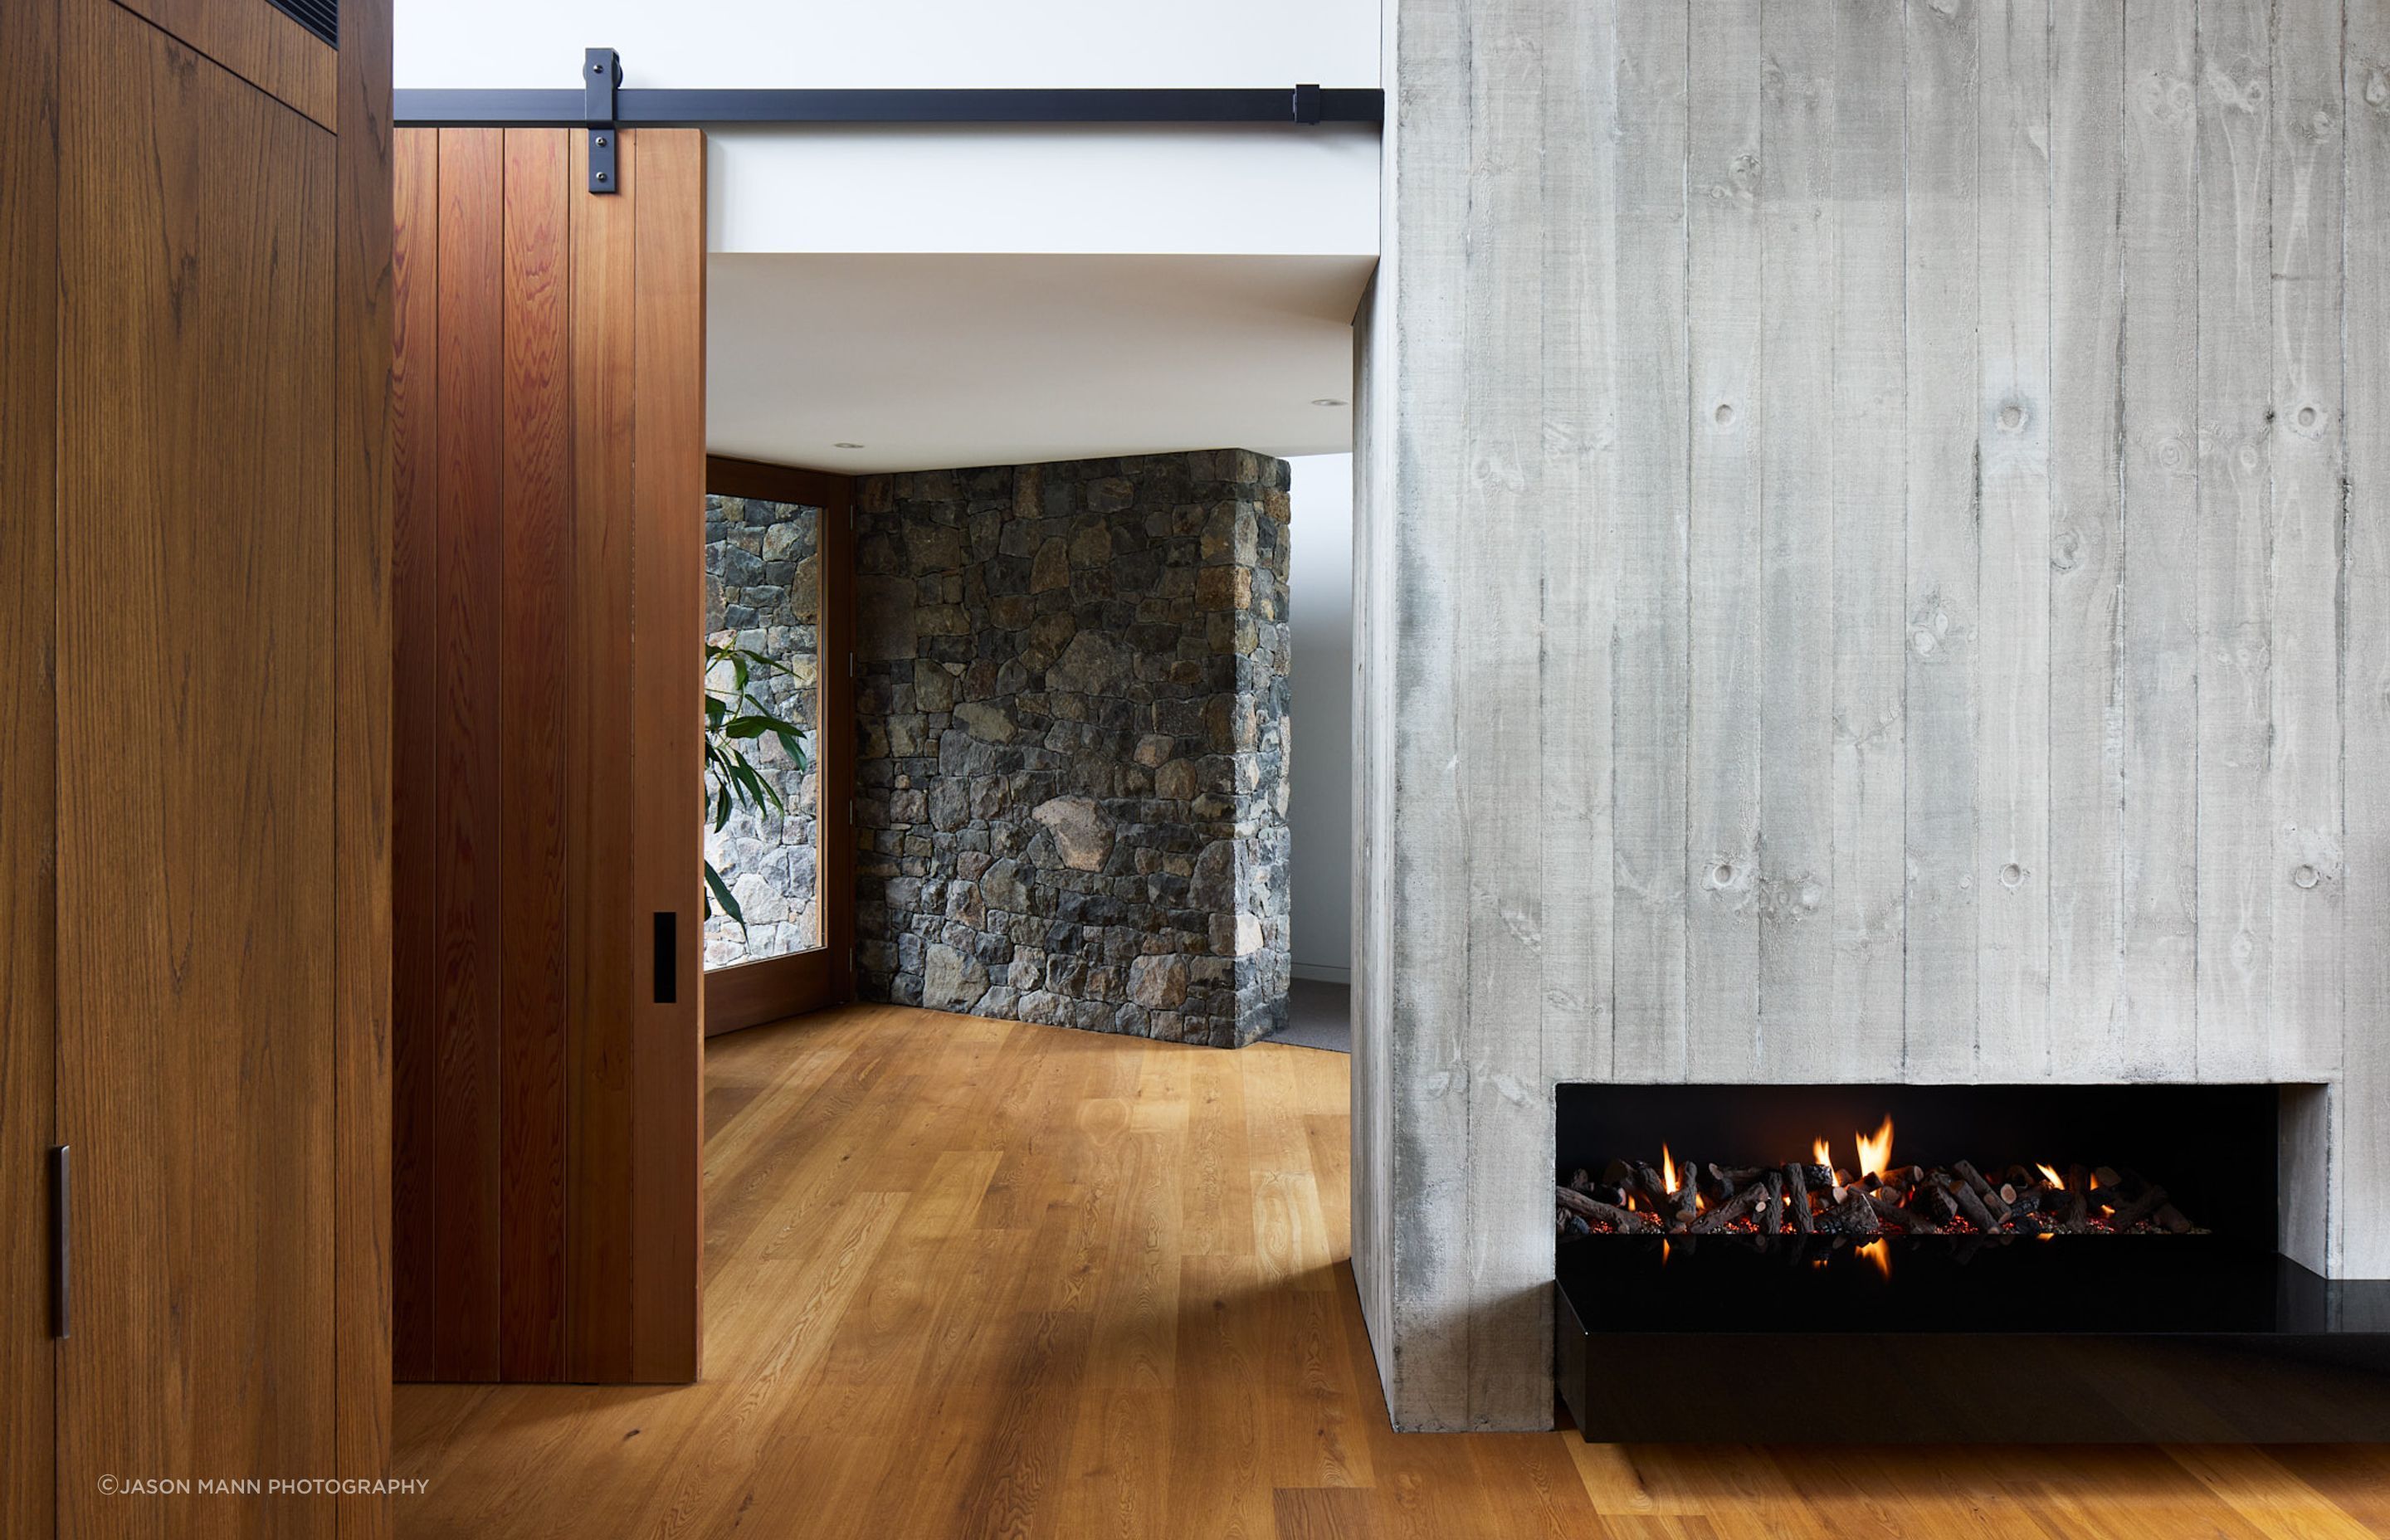 The entrance hall sits at the “knuckle of the two wings”.  Its lower ceiling height feels protective, complemented by warmly toned timber. Locally sourced volcanic stone extends from the exterior into the interior, softening the transition whilst firmly rooting the residence in the Port Hills.